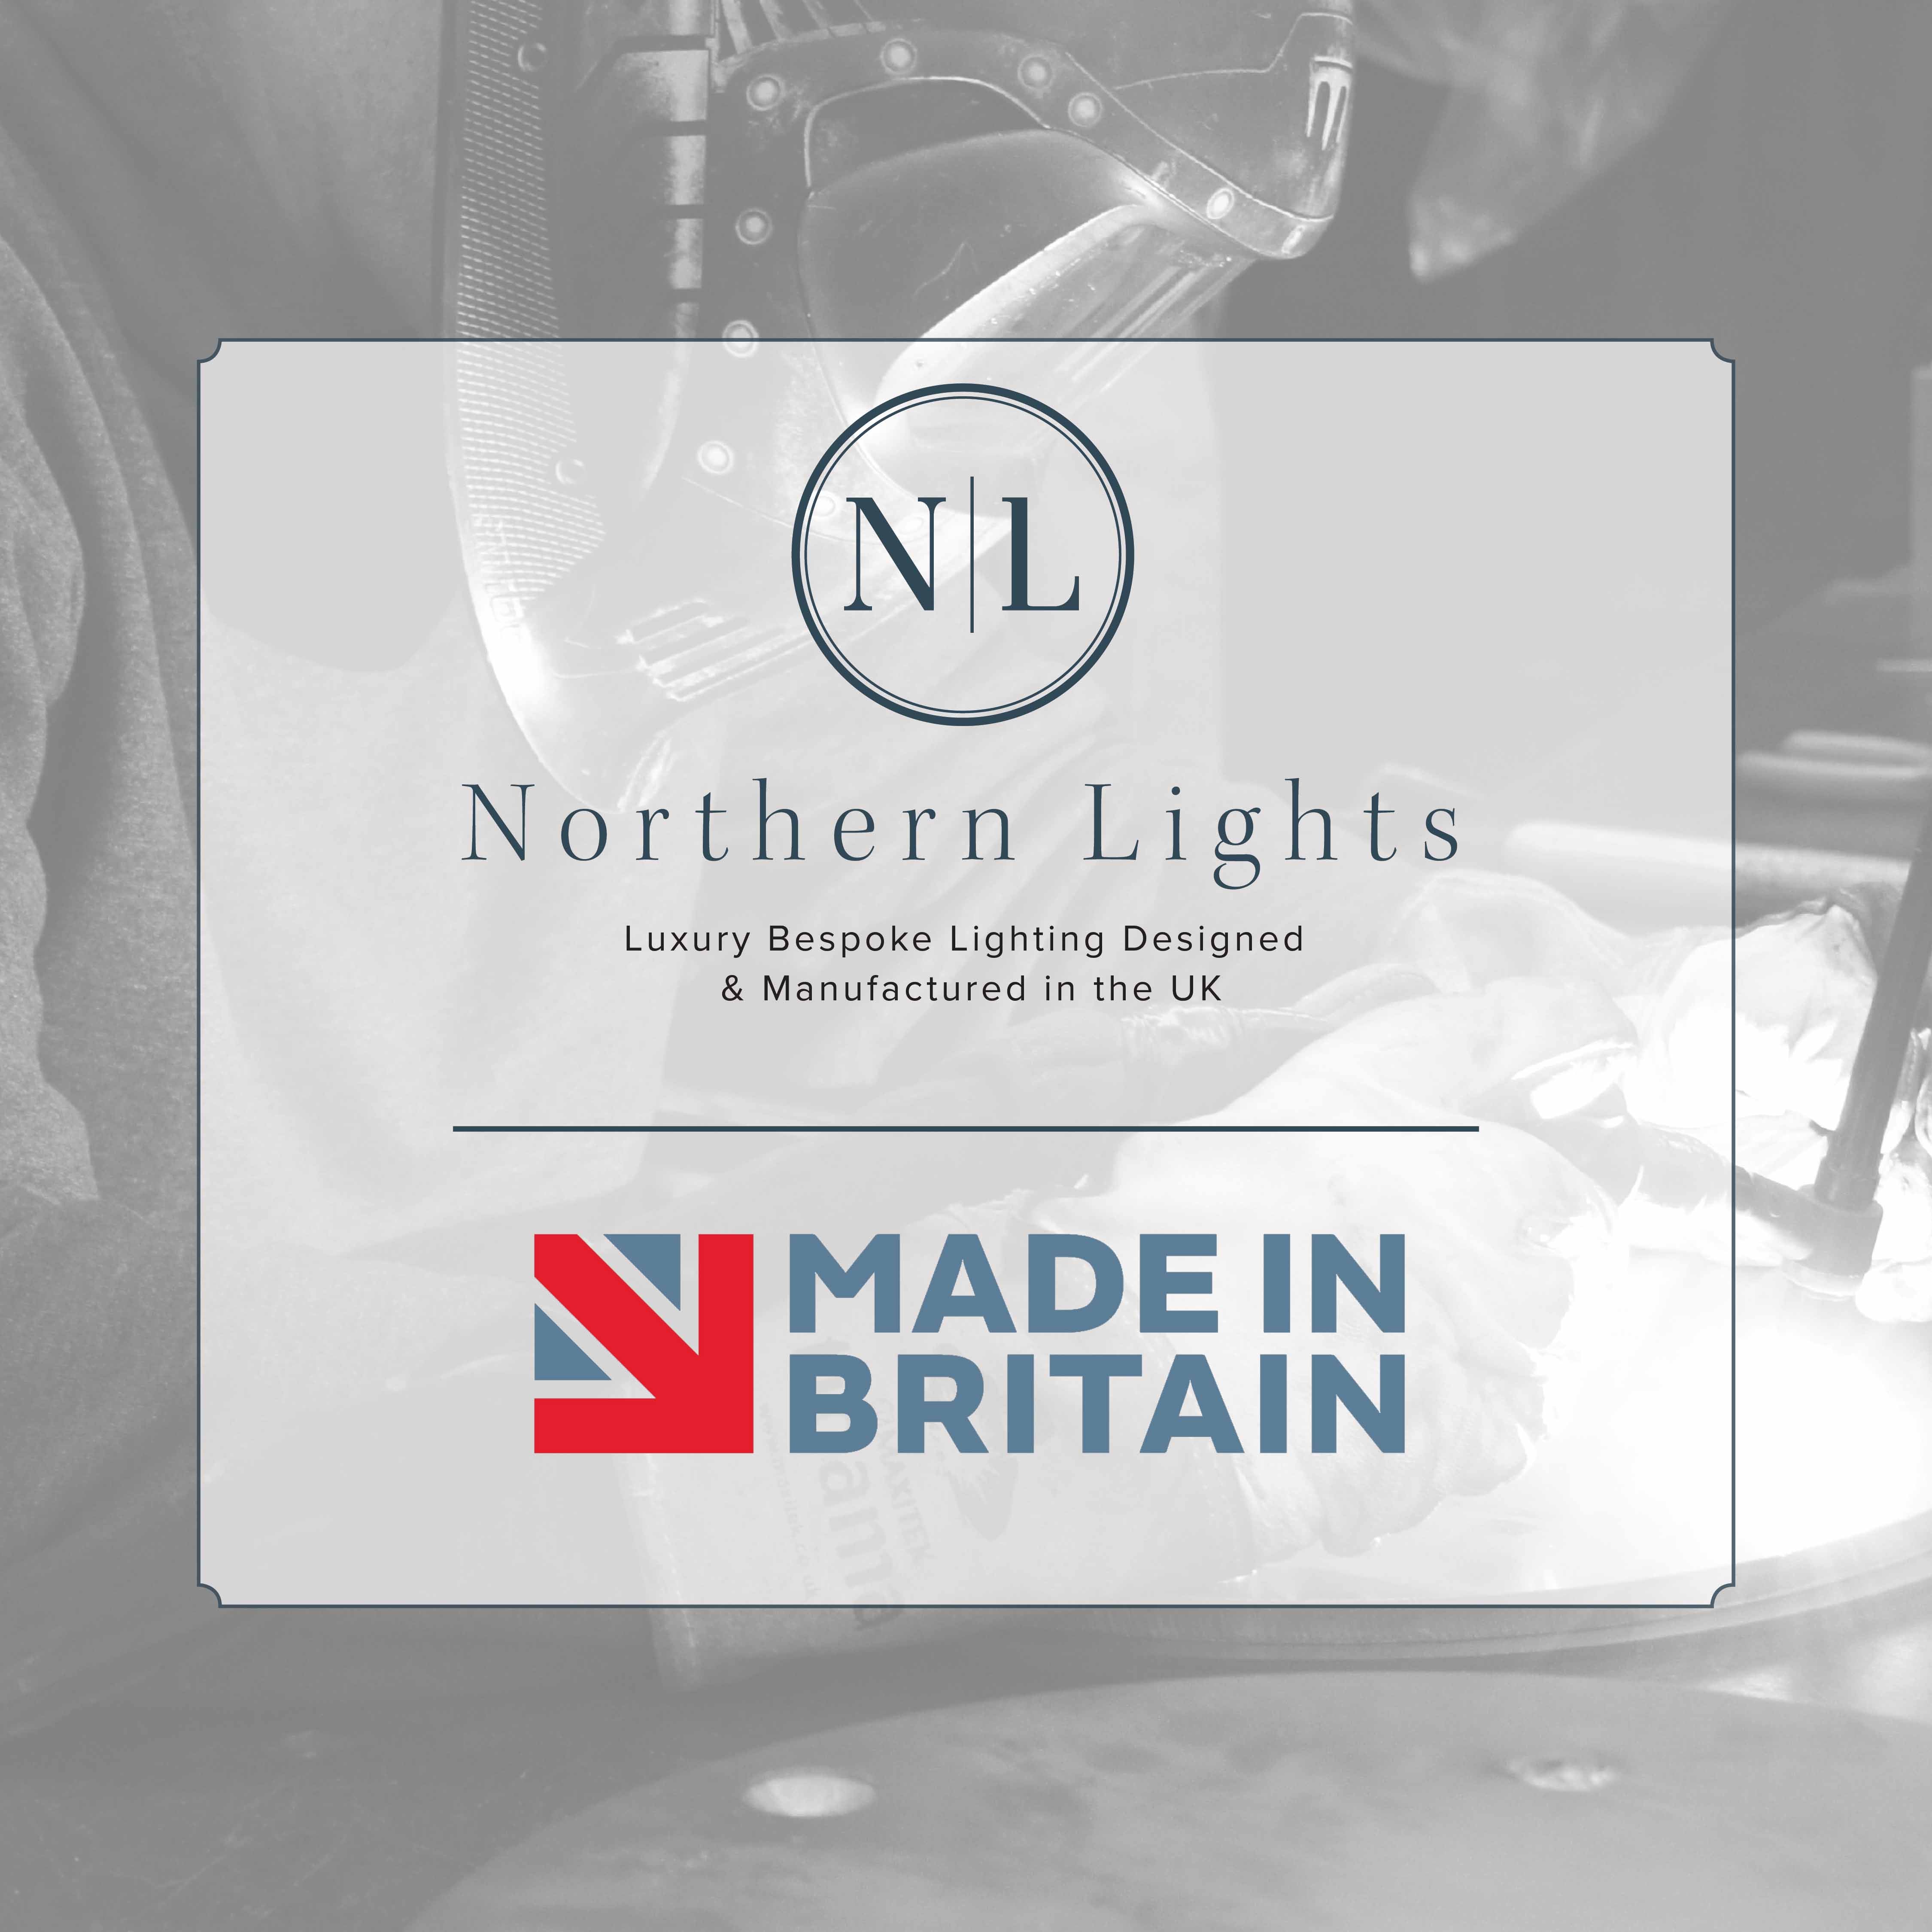 Northern Lights joins Made In Britain